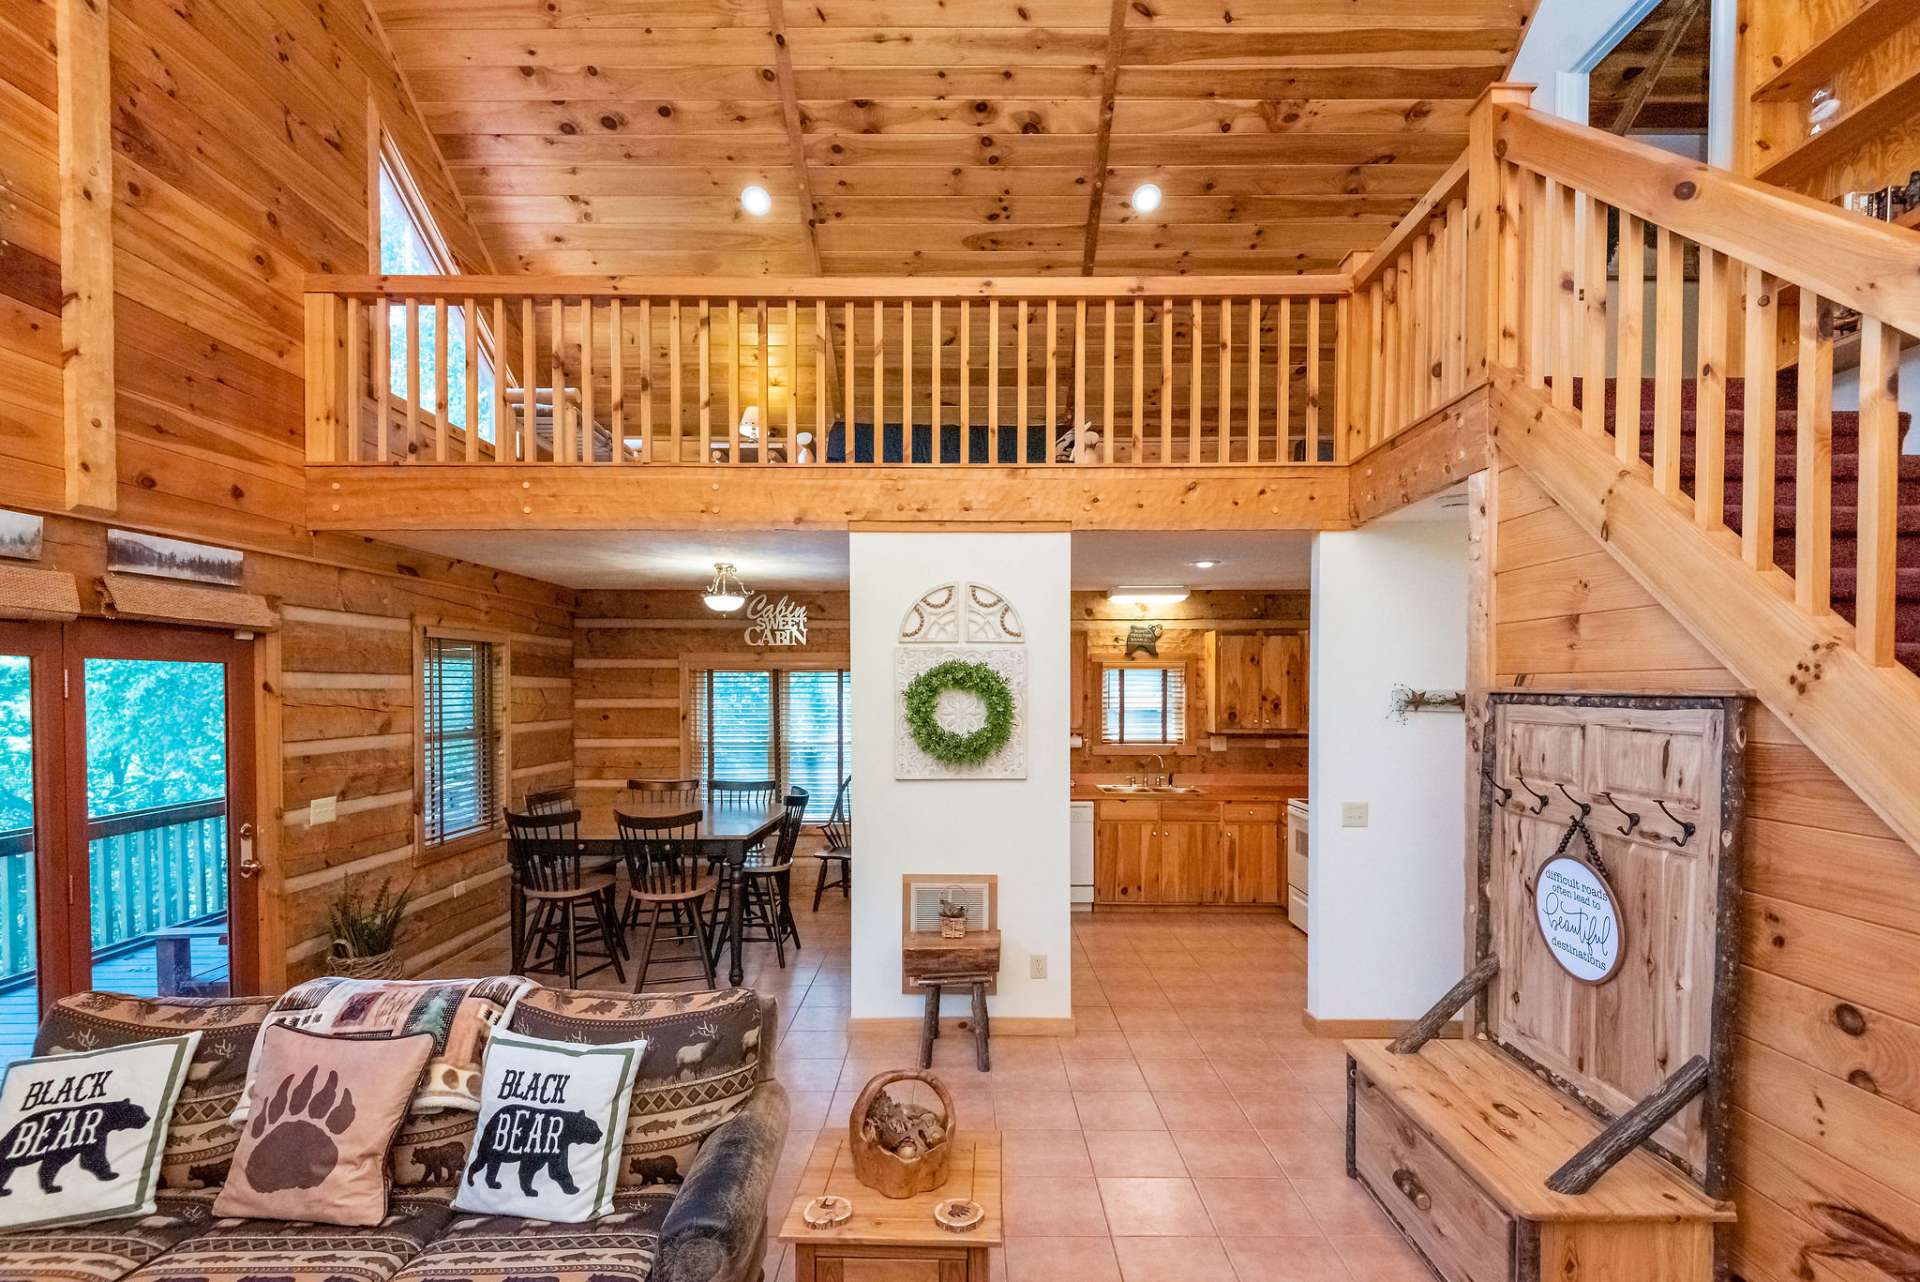 Walk into the great room with living, dining, and kitchen all open to enjoy time together in the mountains.